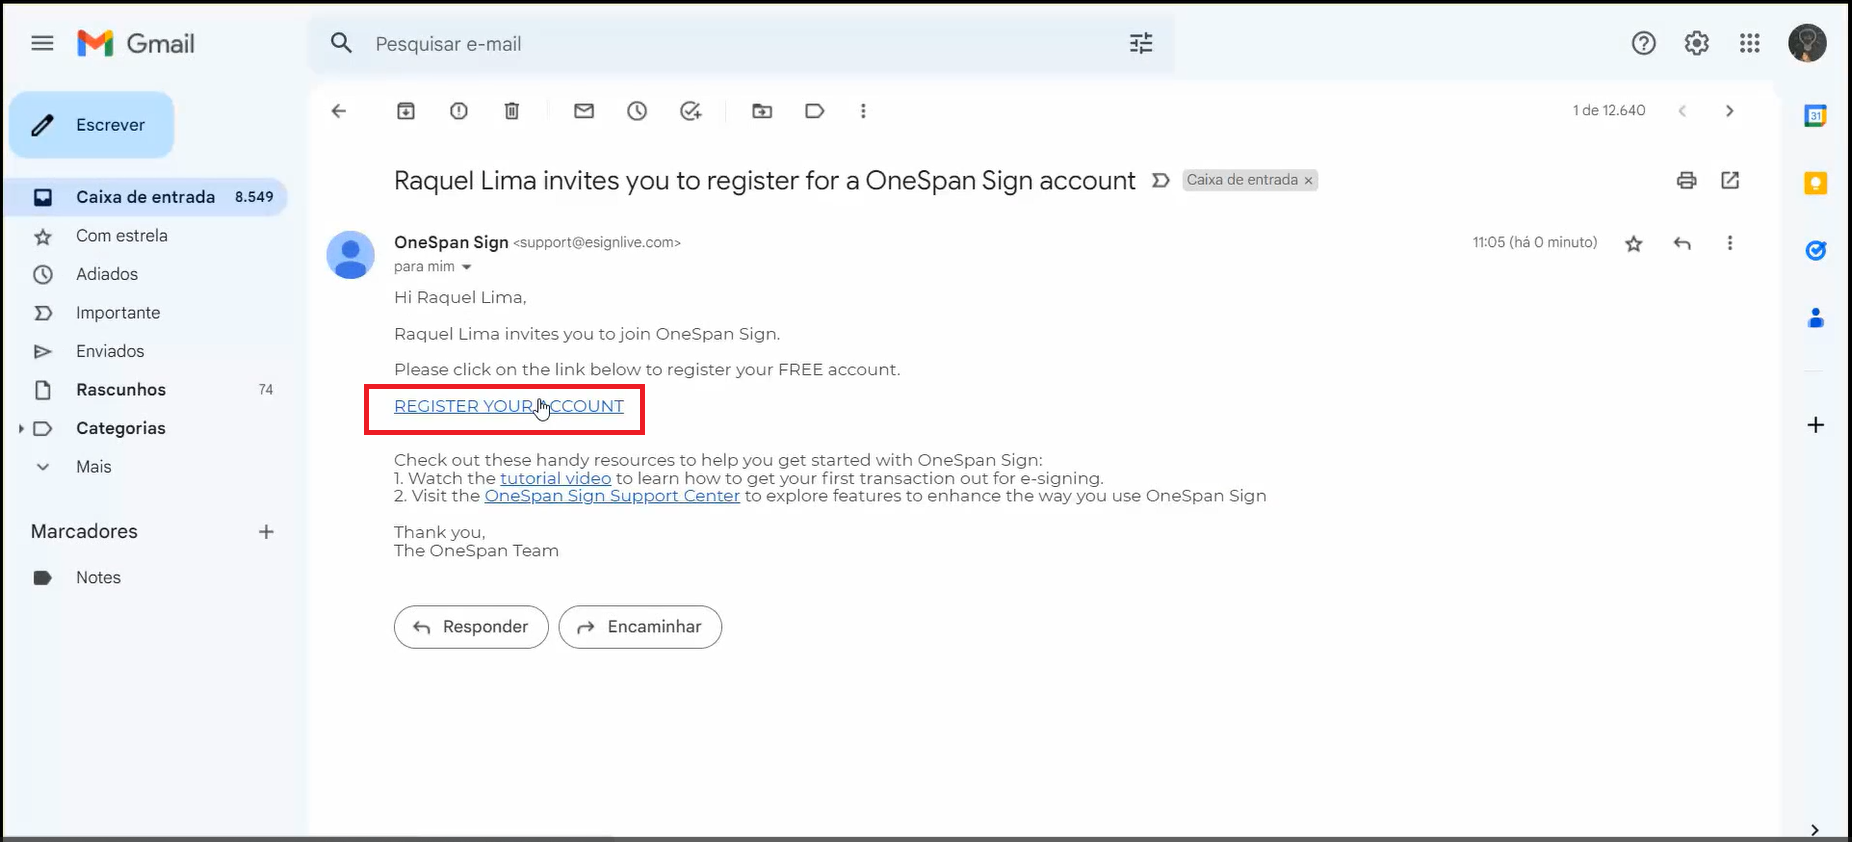 An email invite is sent to the Notary inviting them to register for a OneSpan Sign account. 